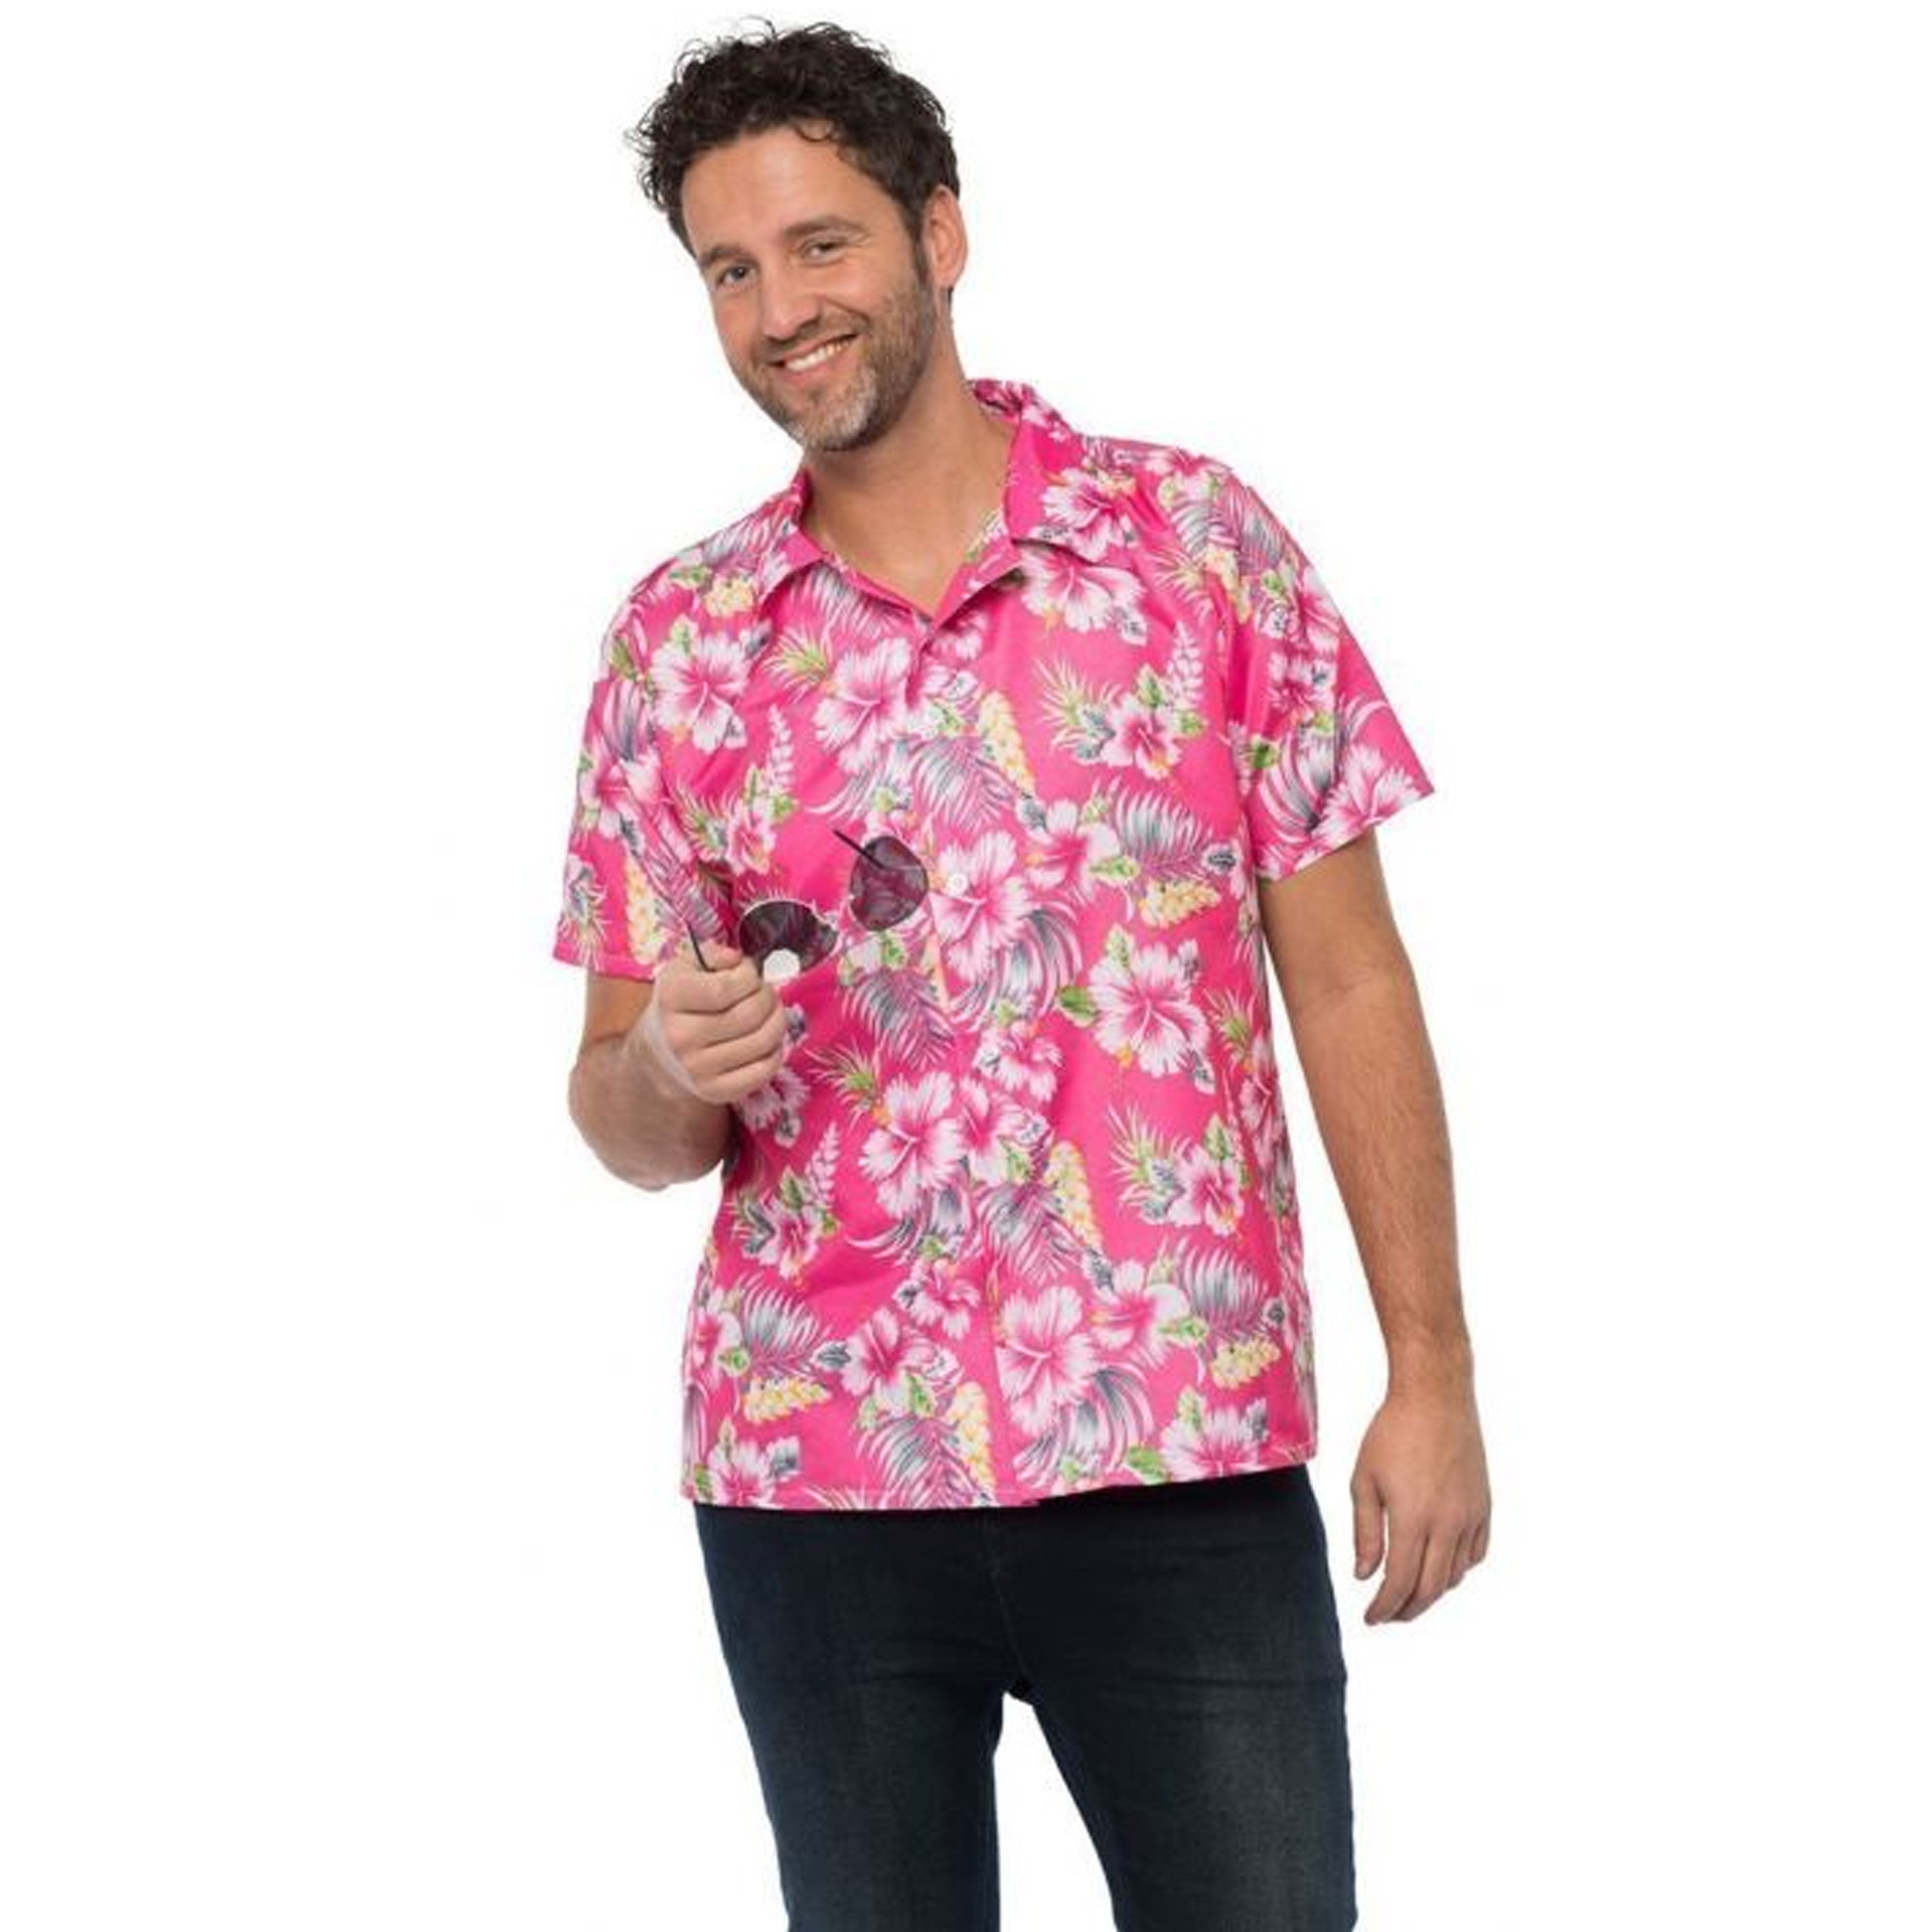 Toppers - Tropical party Hawaii blouse heren - bloemen - roze - carnaval/themafeest - plus size